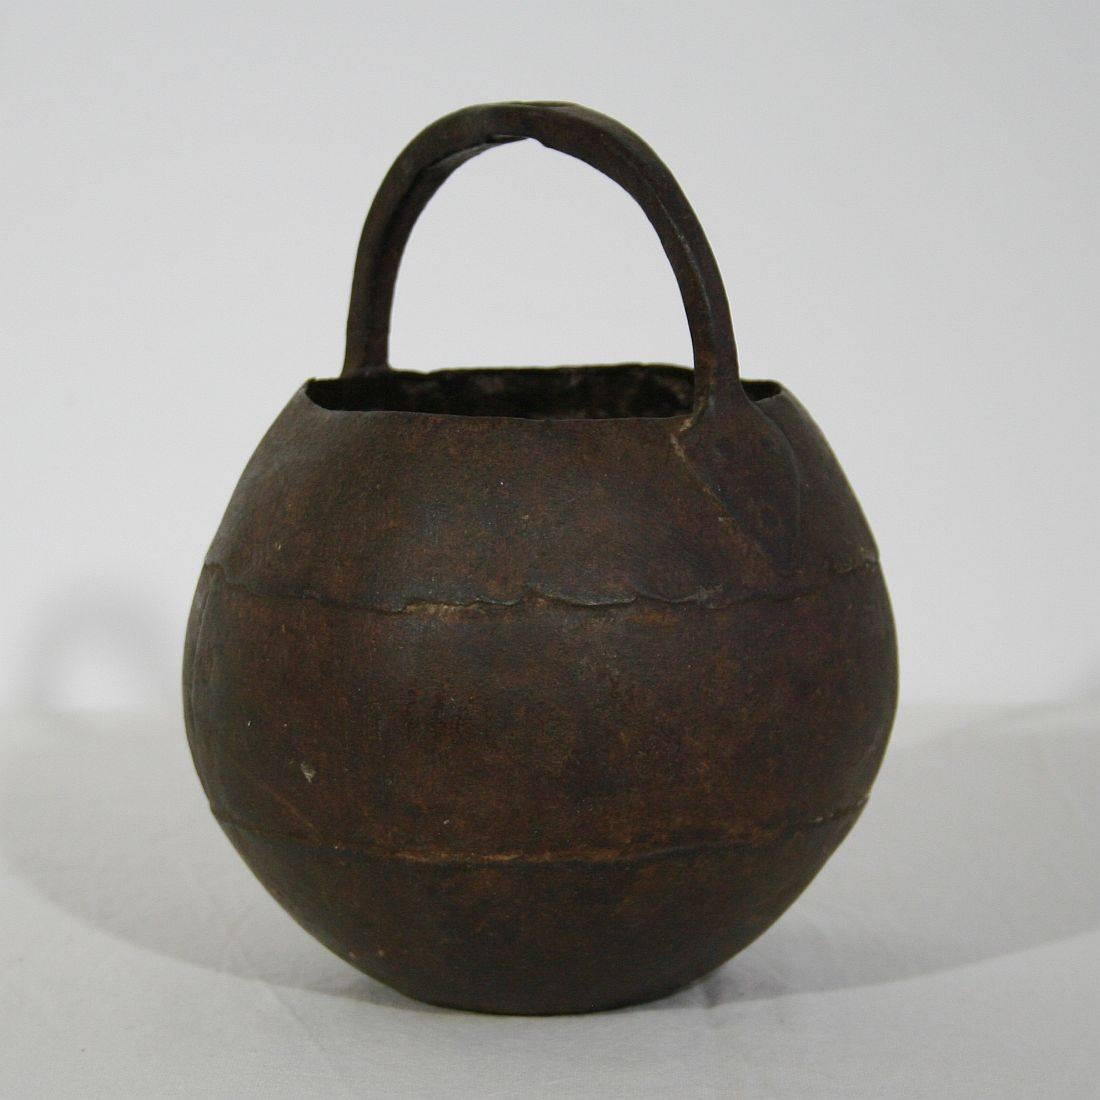 Rare hand-forged iron cooking pot
Probably India 18th century
Despite of their age in a good condition.